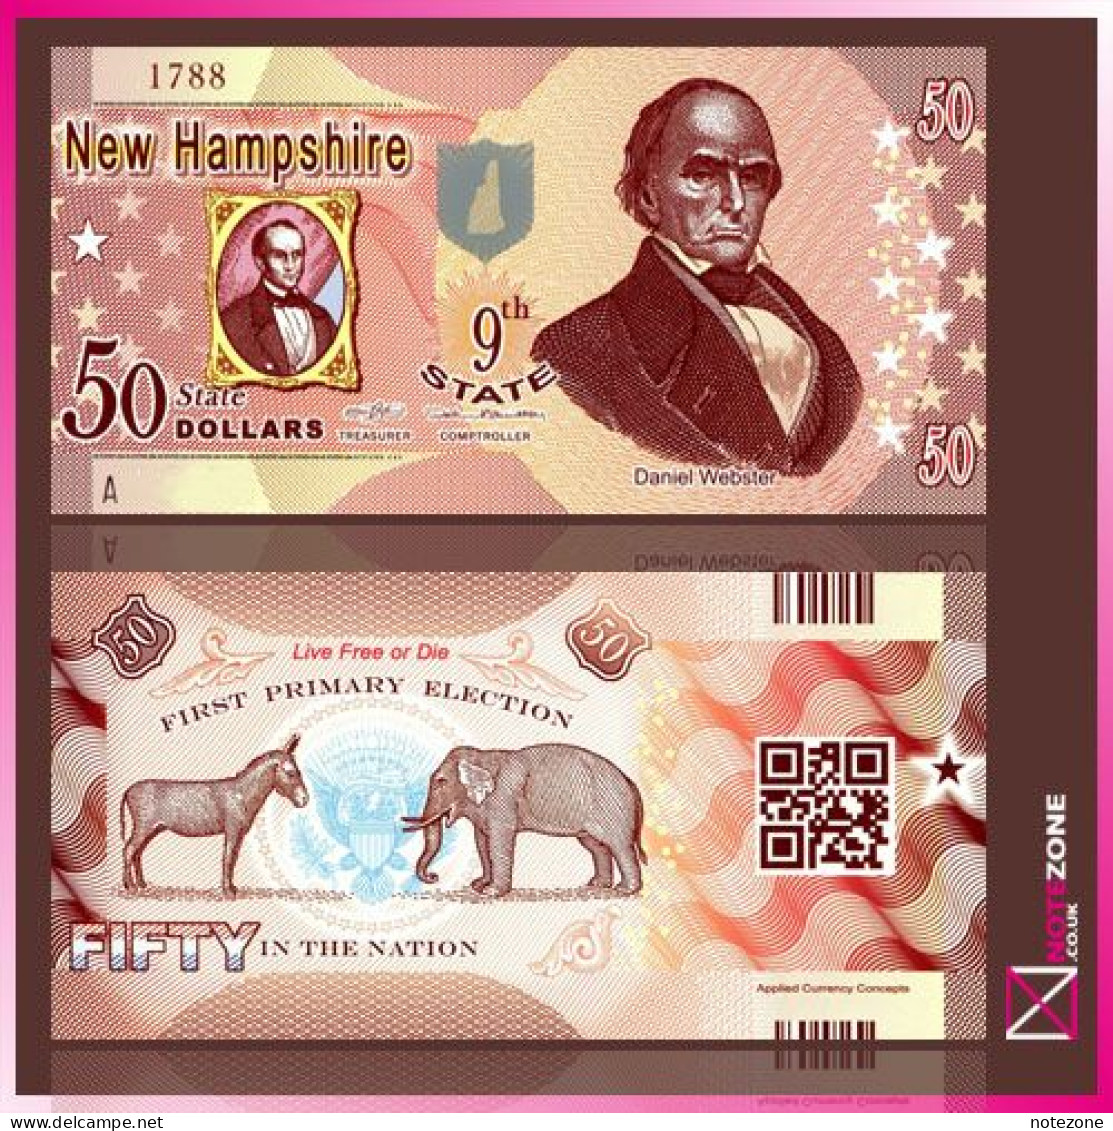 Thomas Stebbins USA $50 STATES New Hampshire 9th State Daniel Webster Polymer Fantasy Private Banknote Note - Sets & Sammlungen